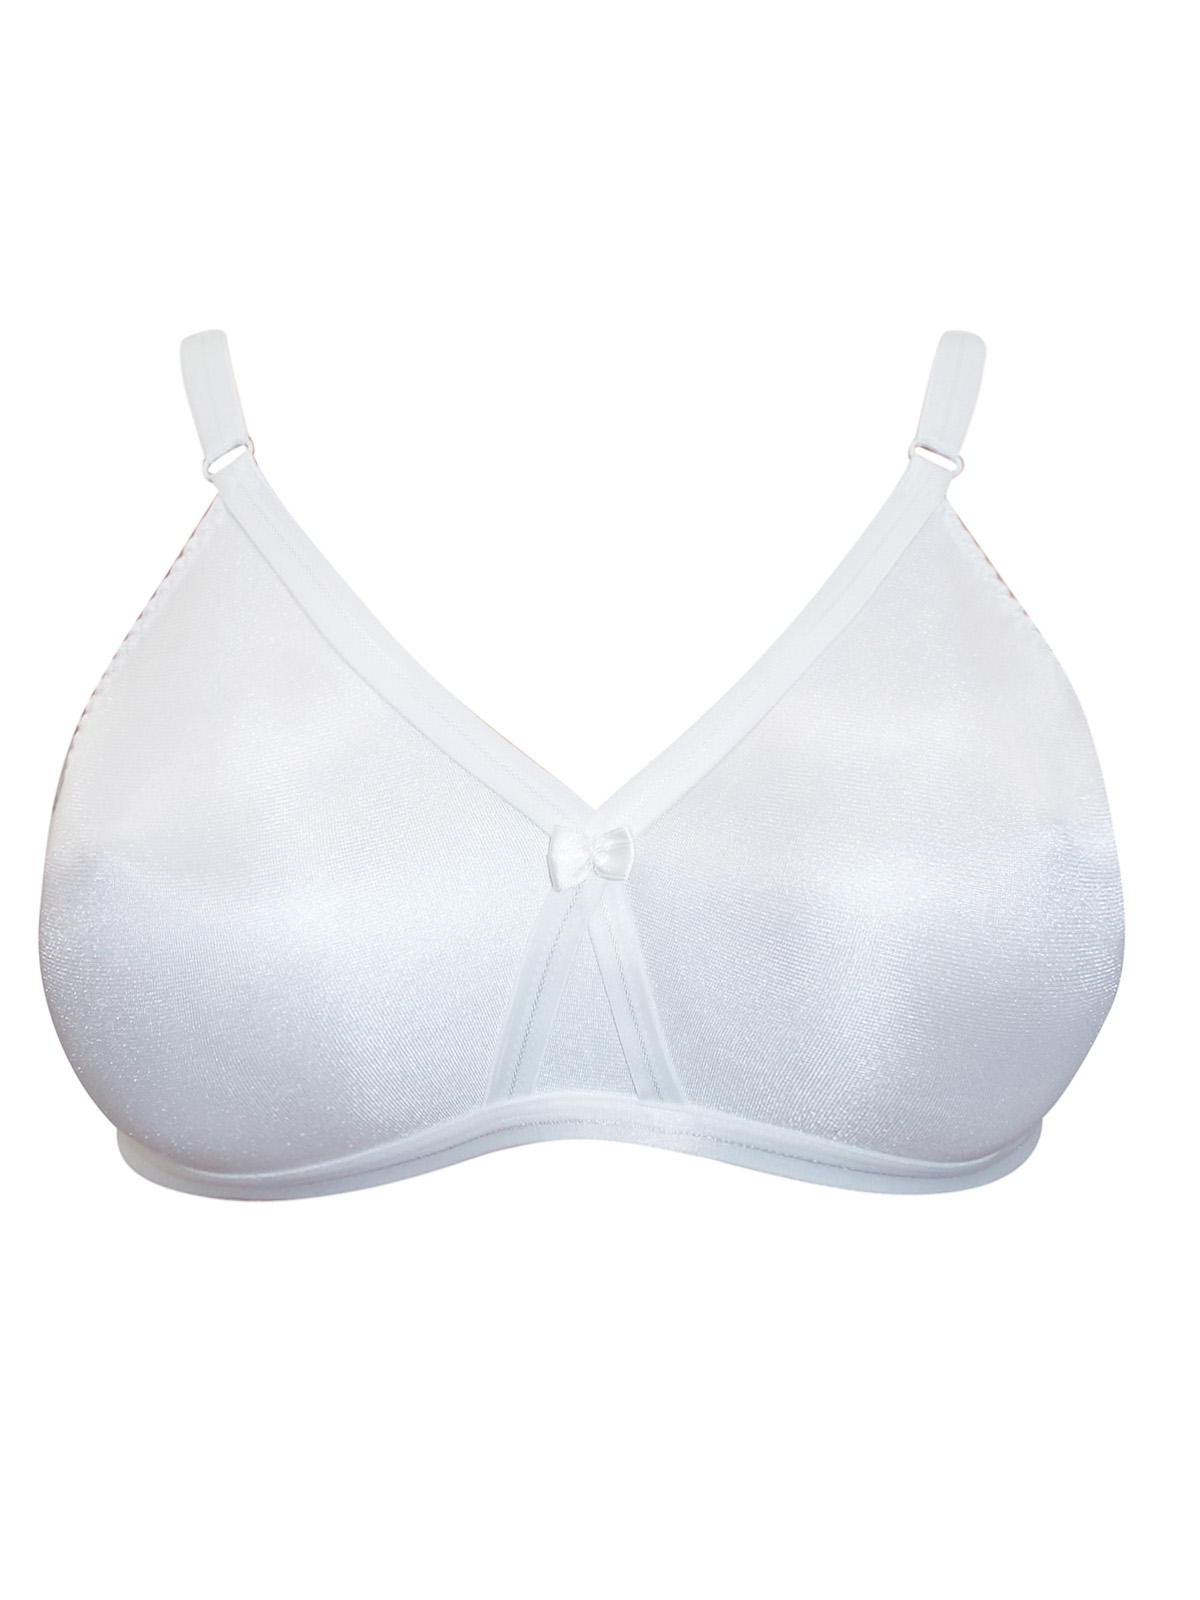 Trofe - - Trofé CHAMPAGNE Crossover Non-Wired Full Cup Bra - Size 34 to 42  (B-C-D)